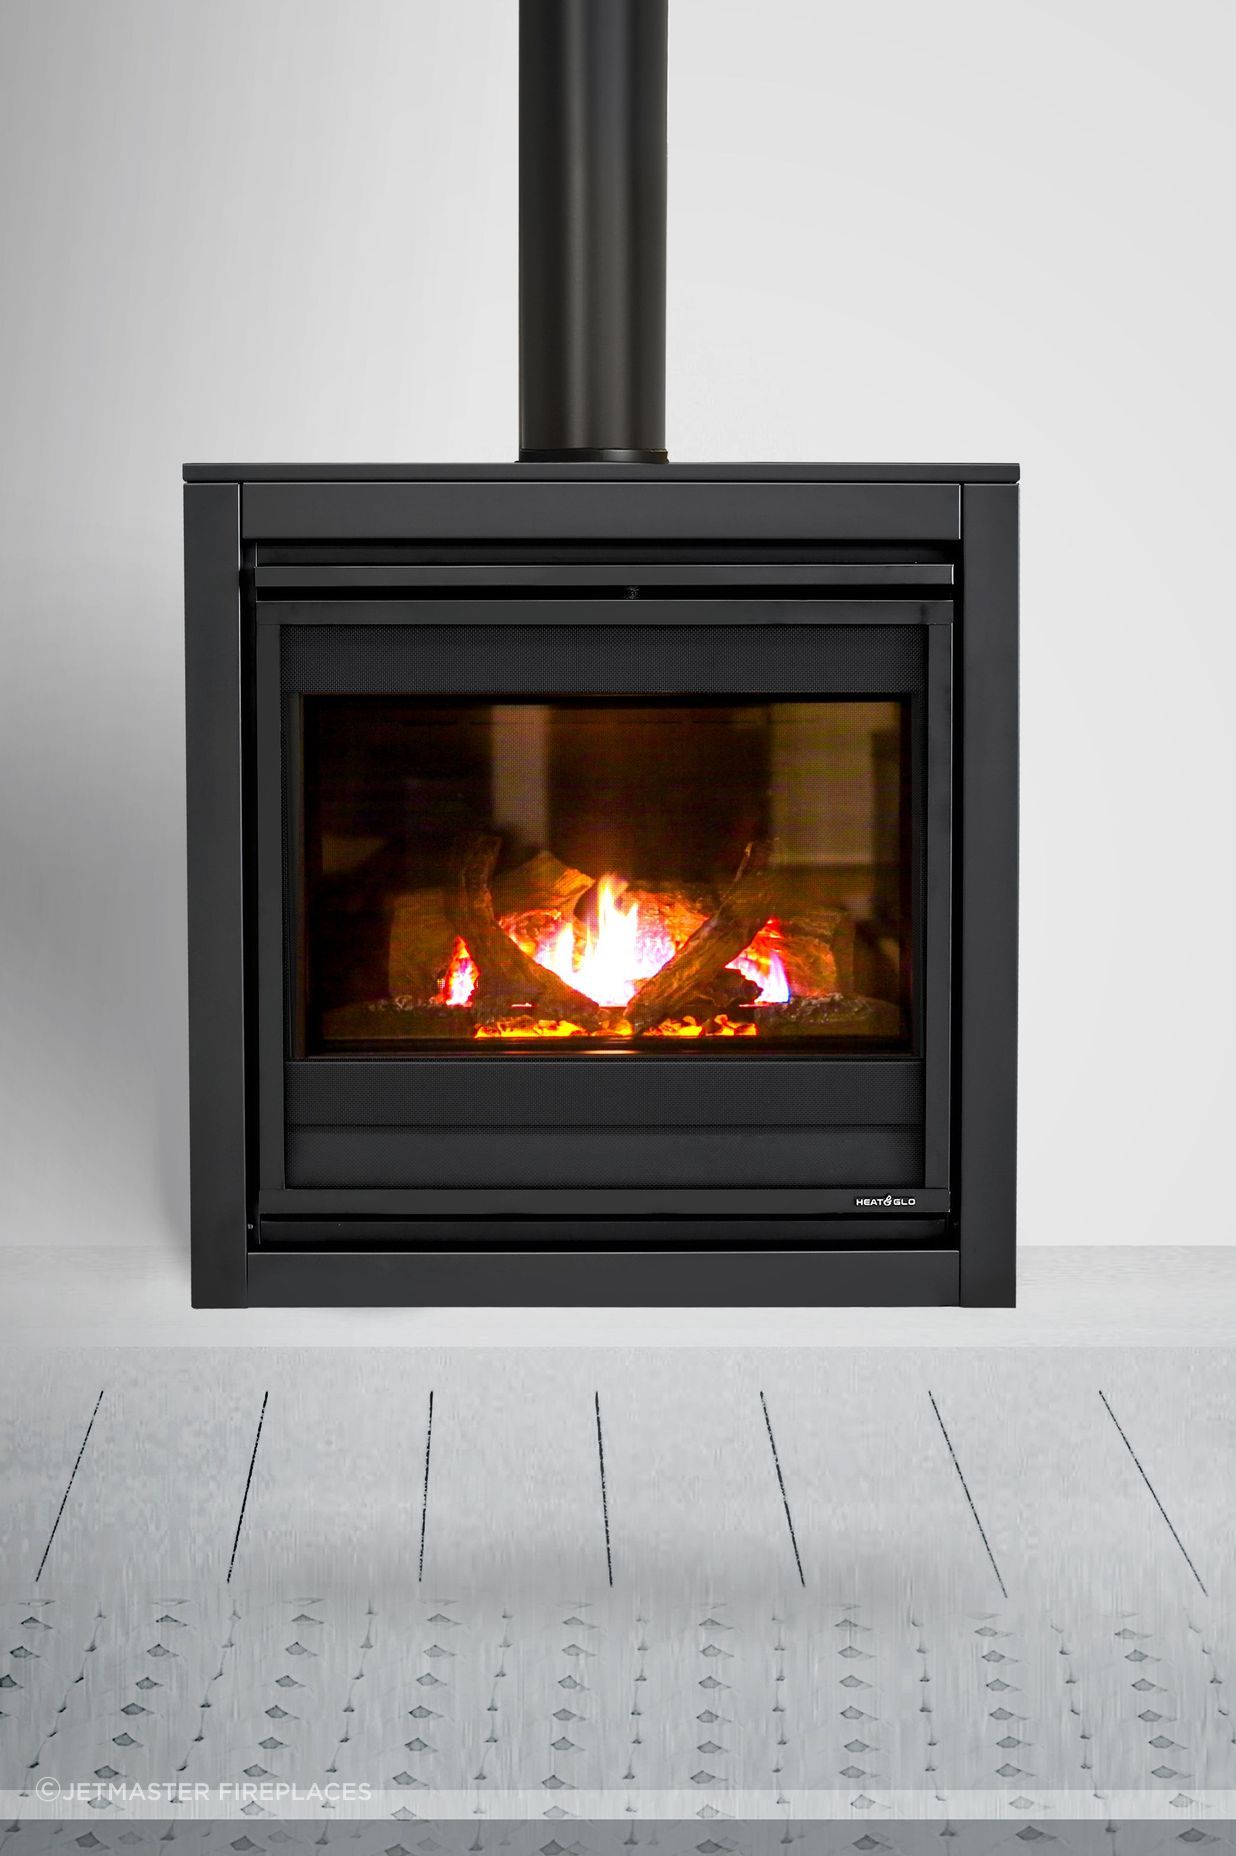 Gas fireplaces often require professional installation. Featured product: the X-Series Freestander Gas Fireplace.